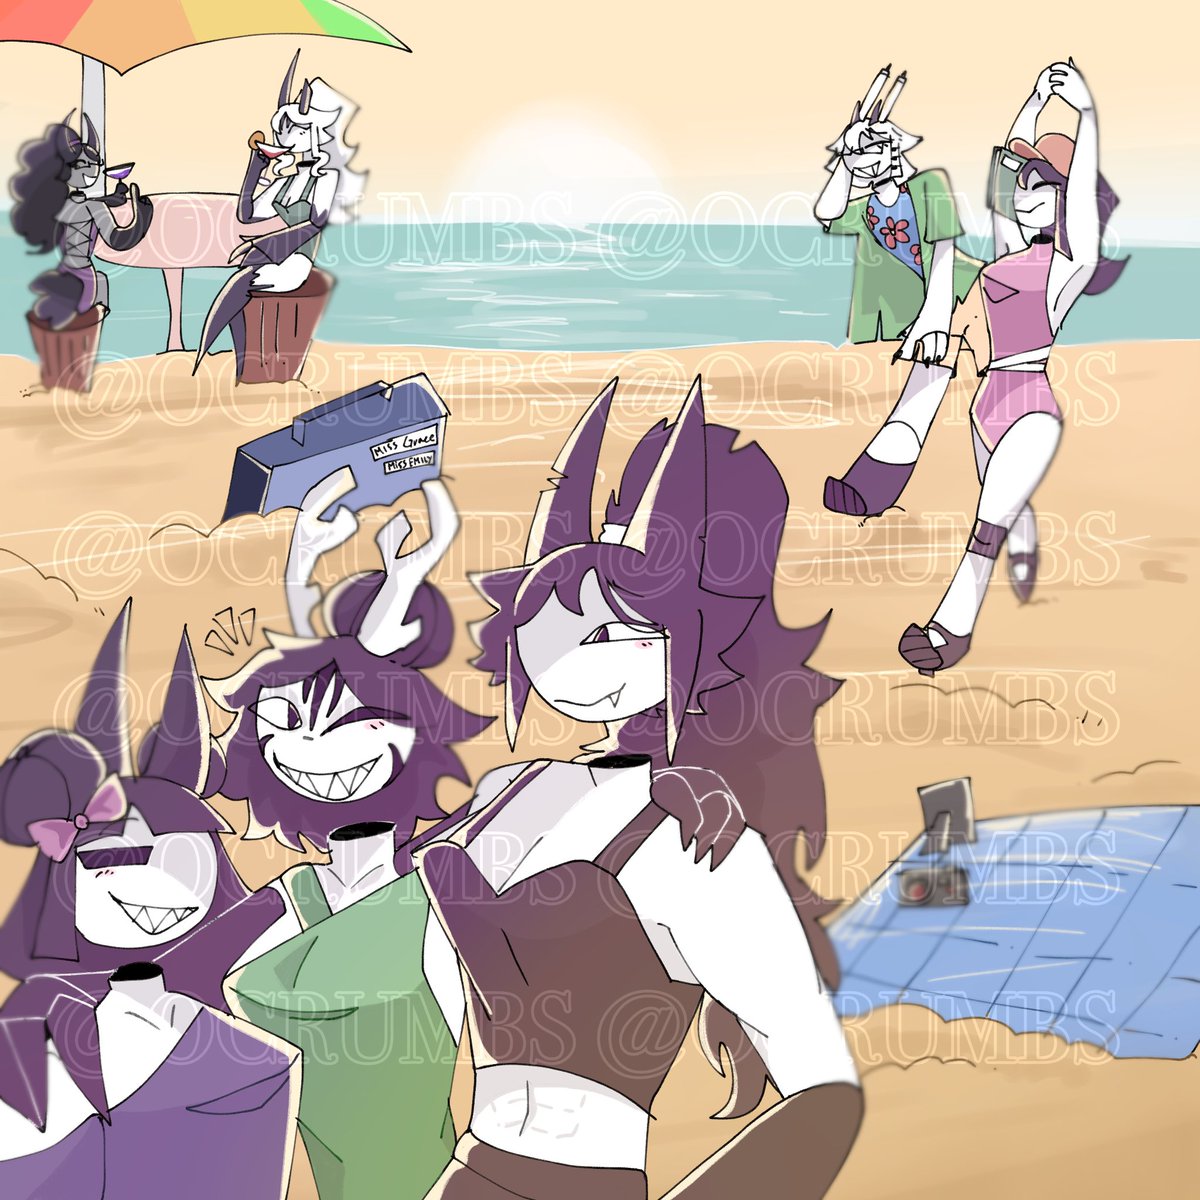 I cant wait for summer!

Beach time!

#fundamentalpapereducation 
#fundamentalpapereducationfanart